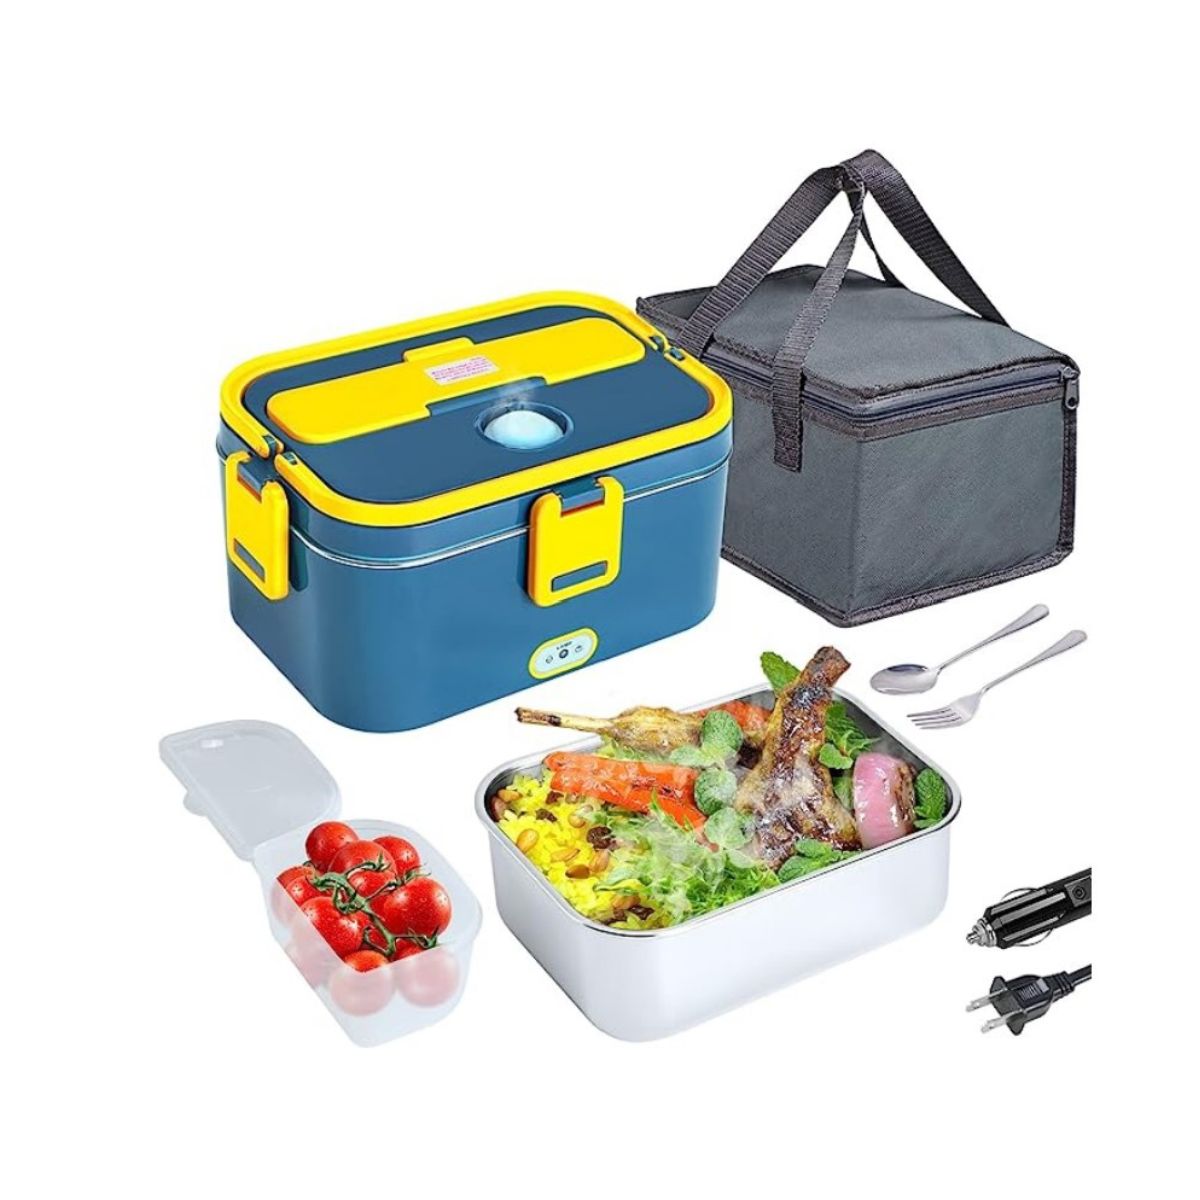 Blue and yellow electric lunch box with pork in food container and cherry tomatoes in fruit container.